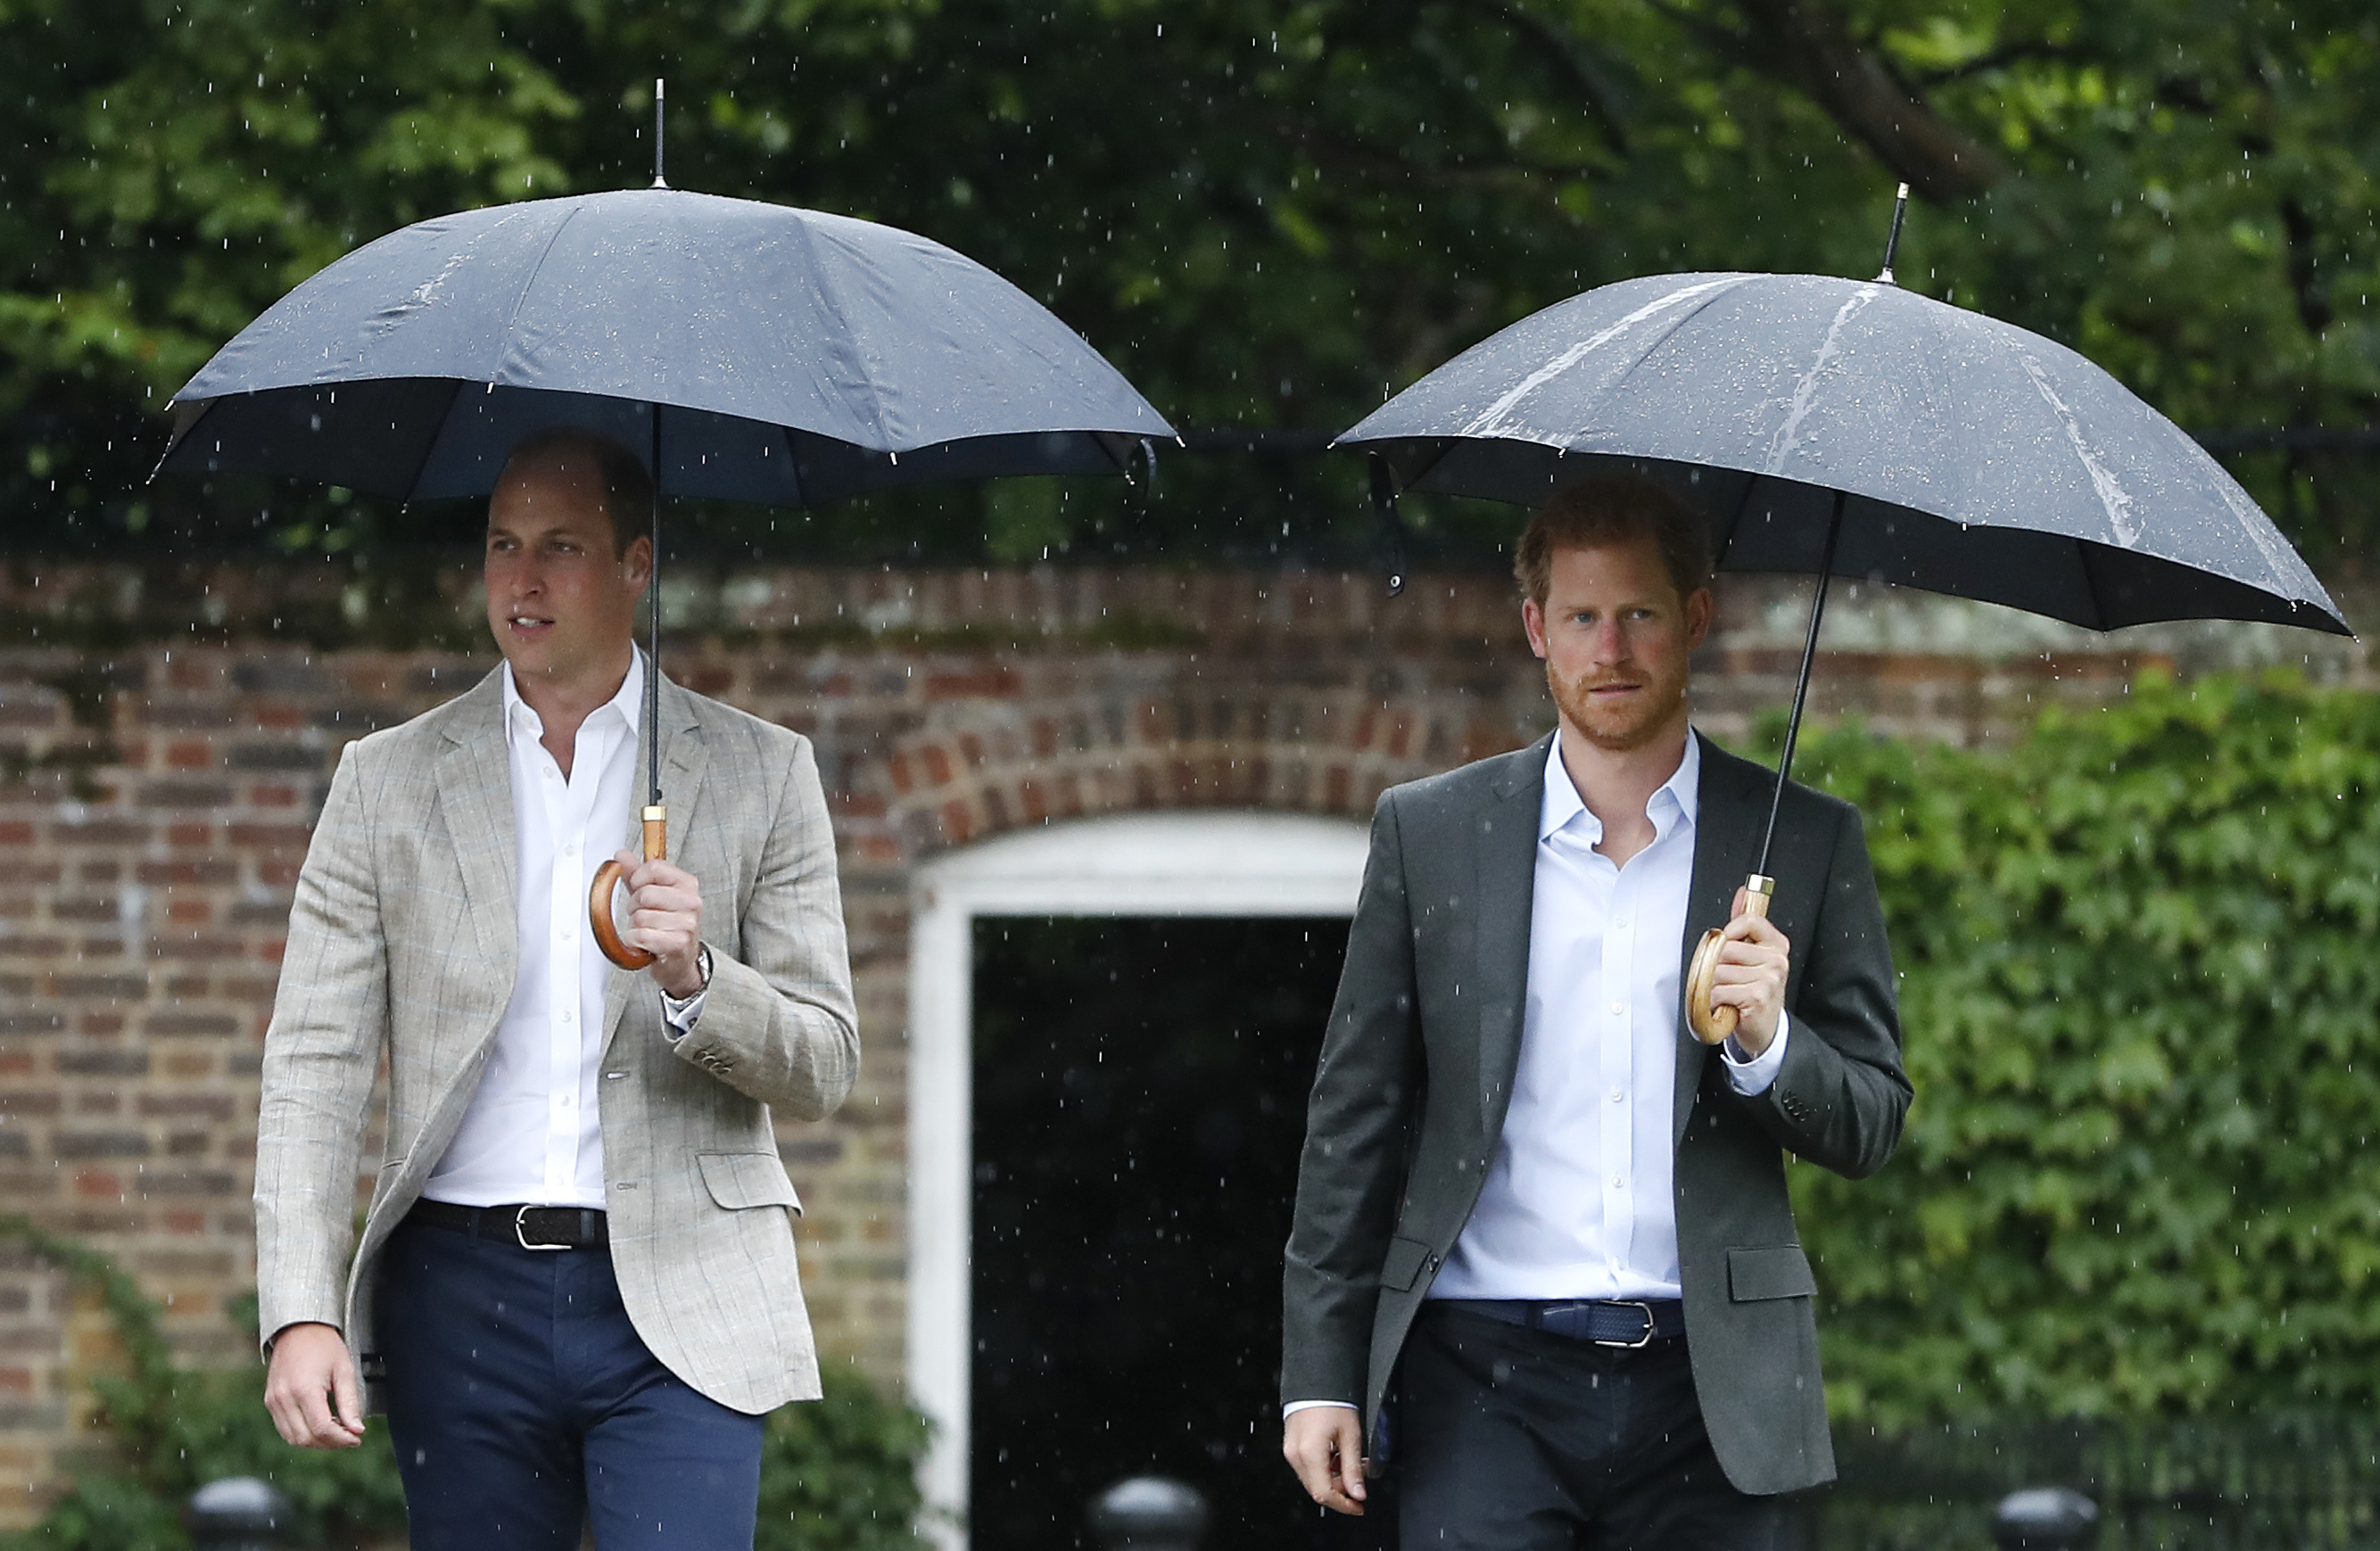 Prince William and Prince Harry visit The Sunken Garden at Kensington Palace on August 30, 2017 in London, England | Source: Getty Images